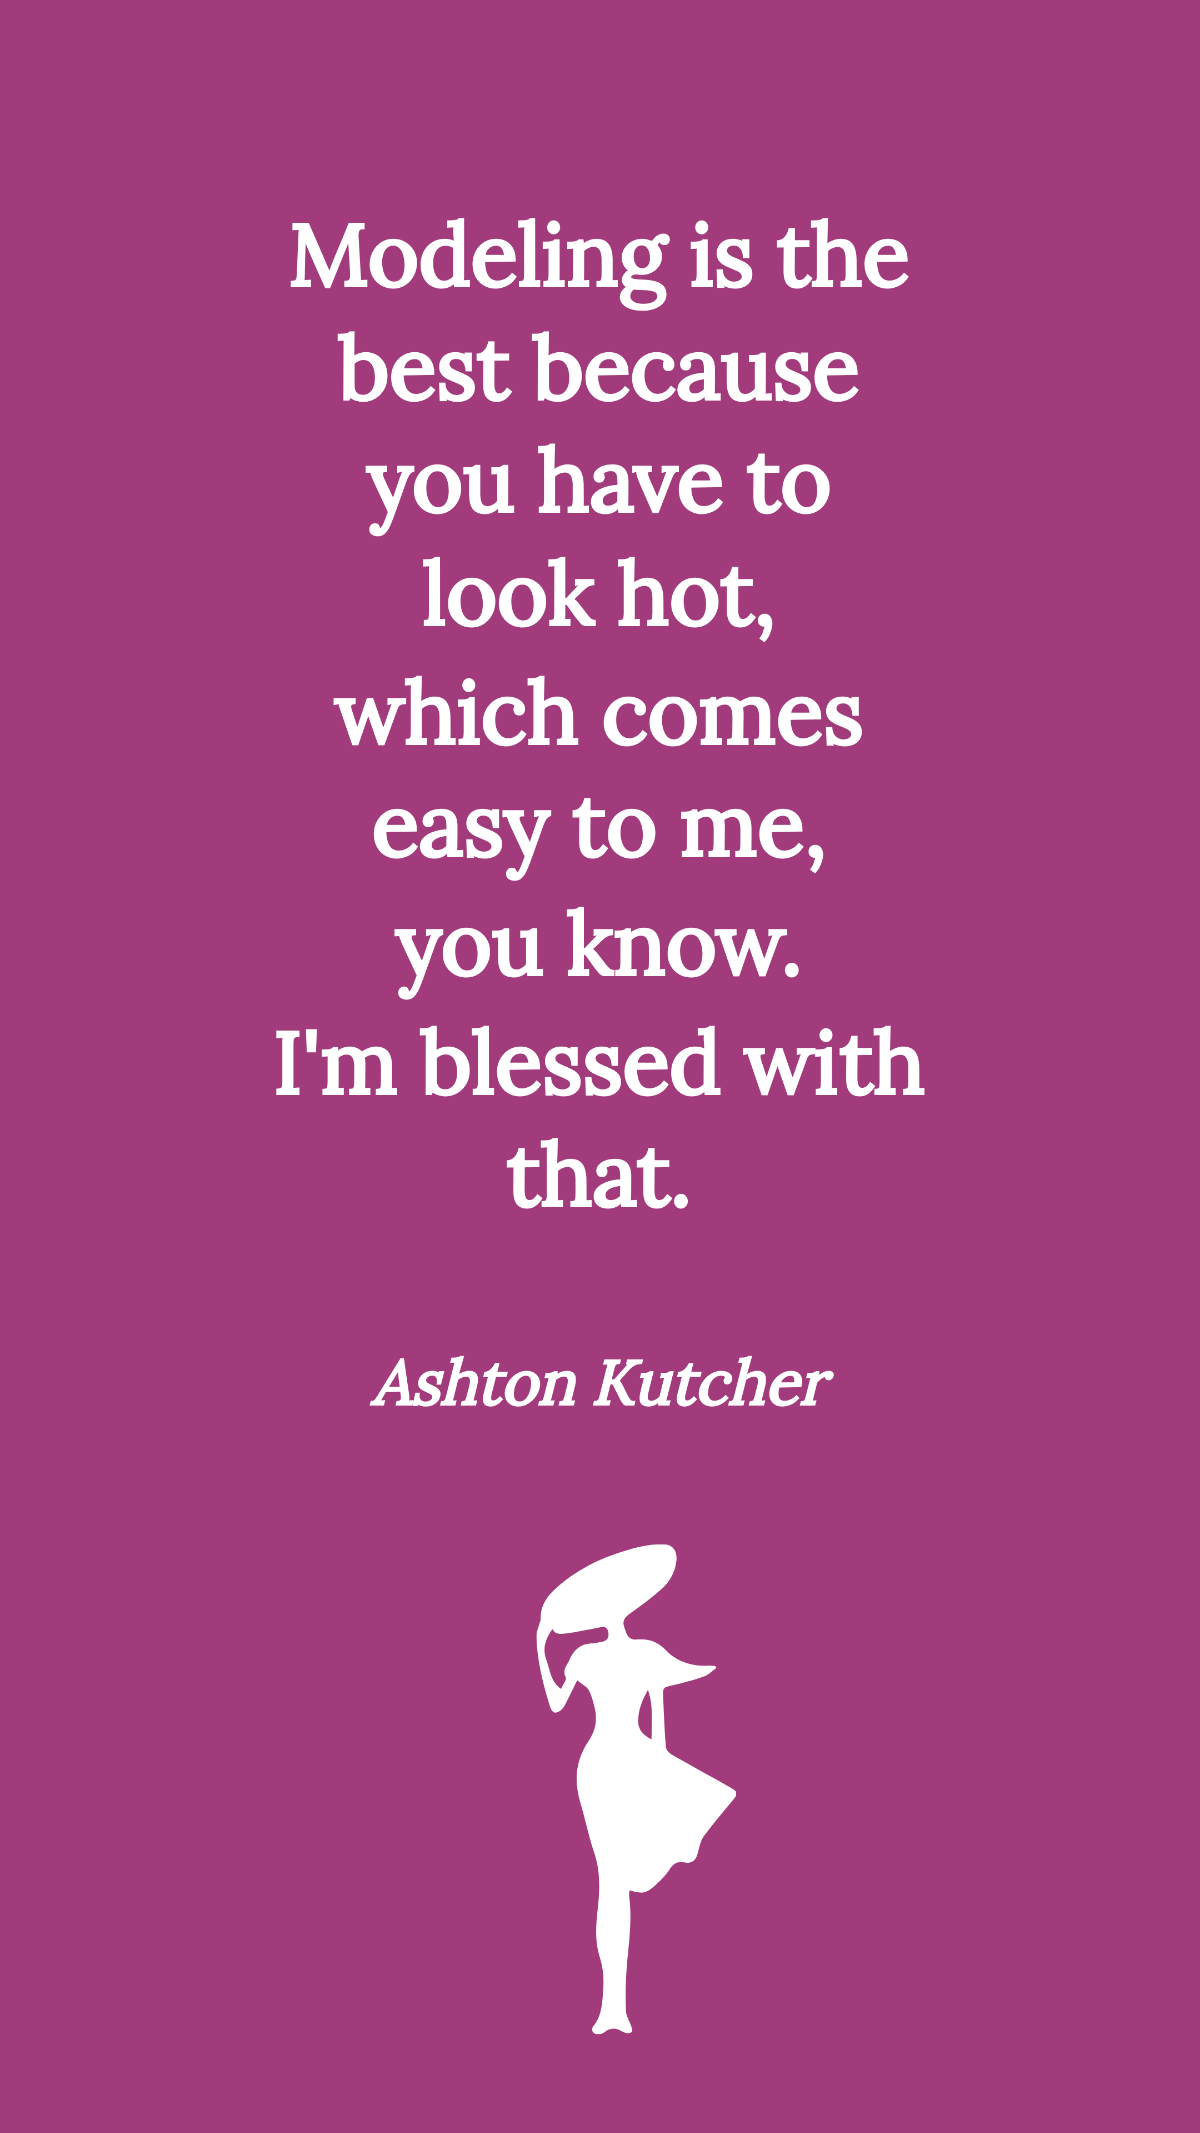 Ashton Kutcher - Modeling is the best because you have to look hot, which comes easy to me, you know. I'm blessed with that. 